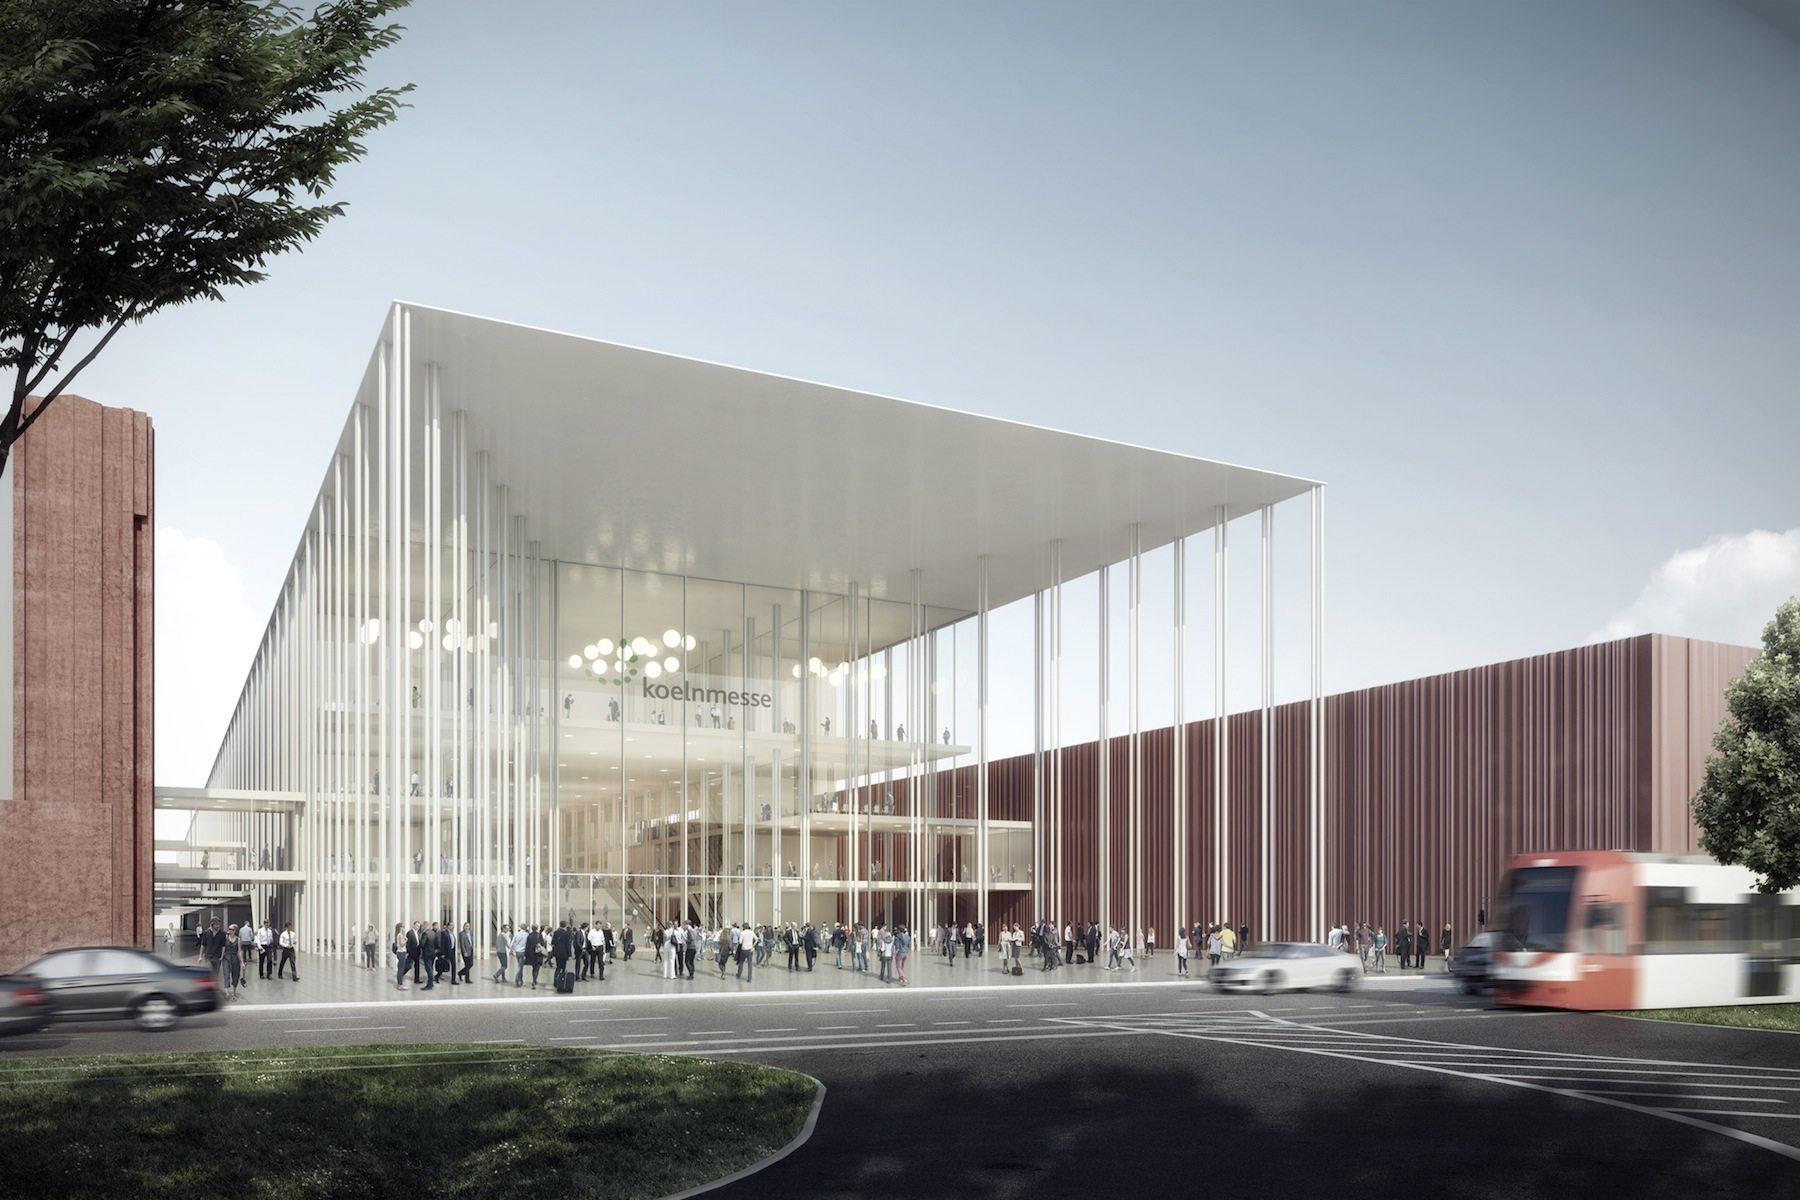 Winning design by JSWD Architekten, Cologne. Architects' competition for Koelnmesse 3.0, draft Entrance East